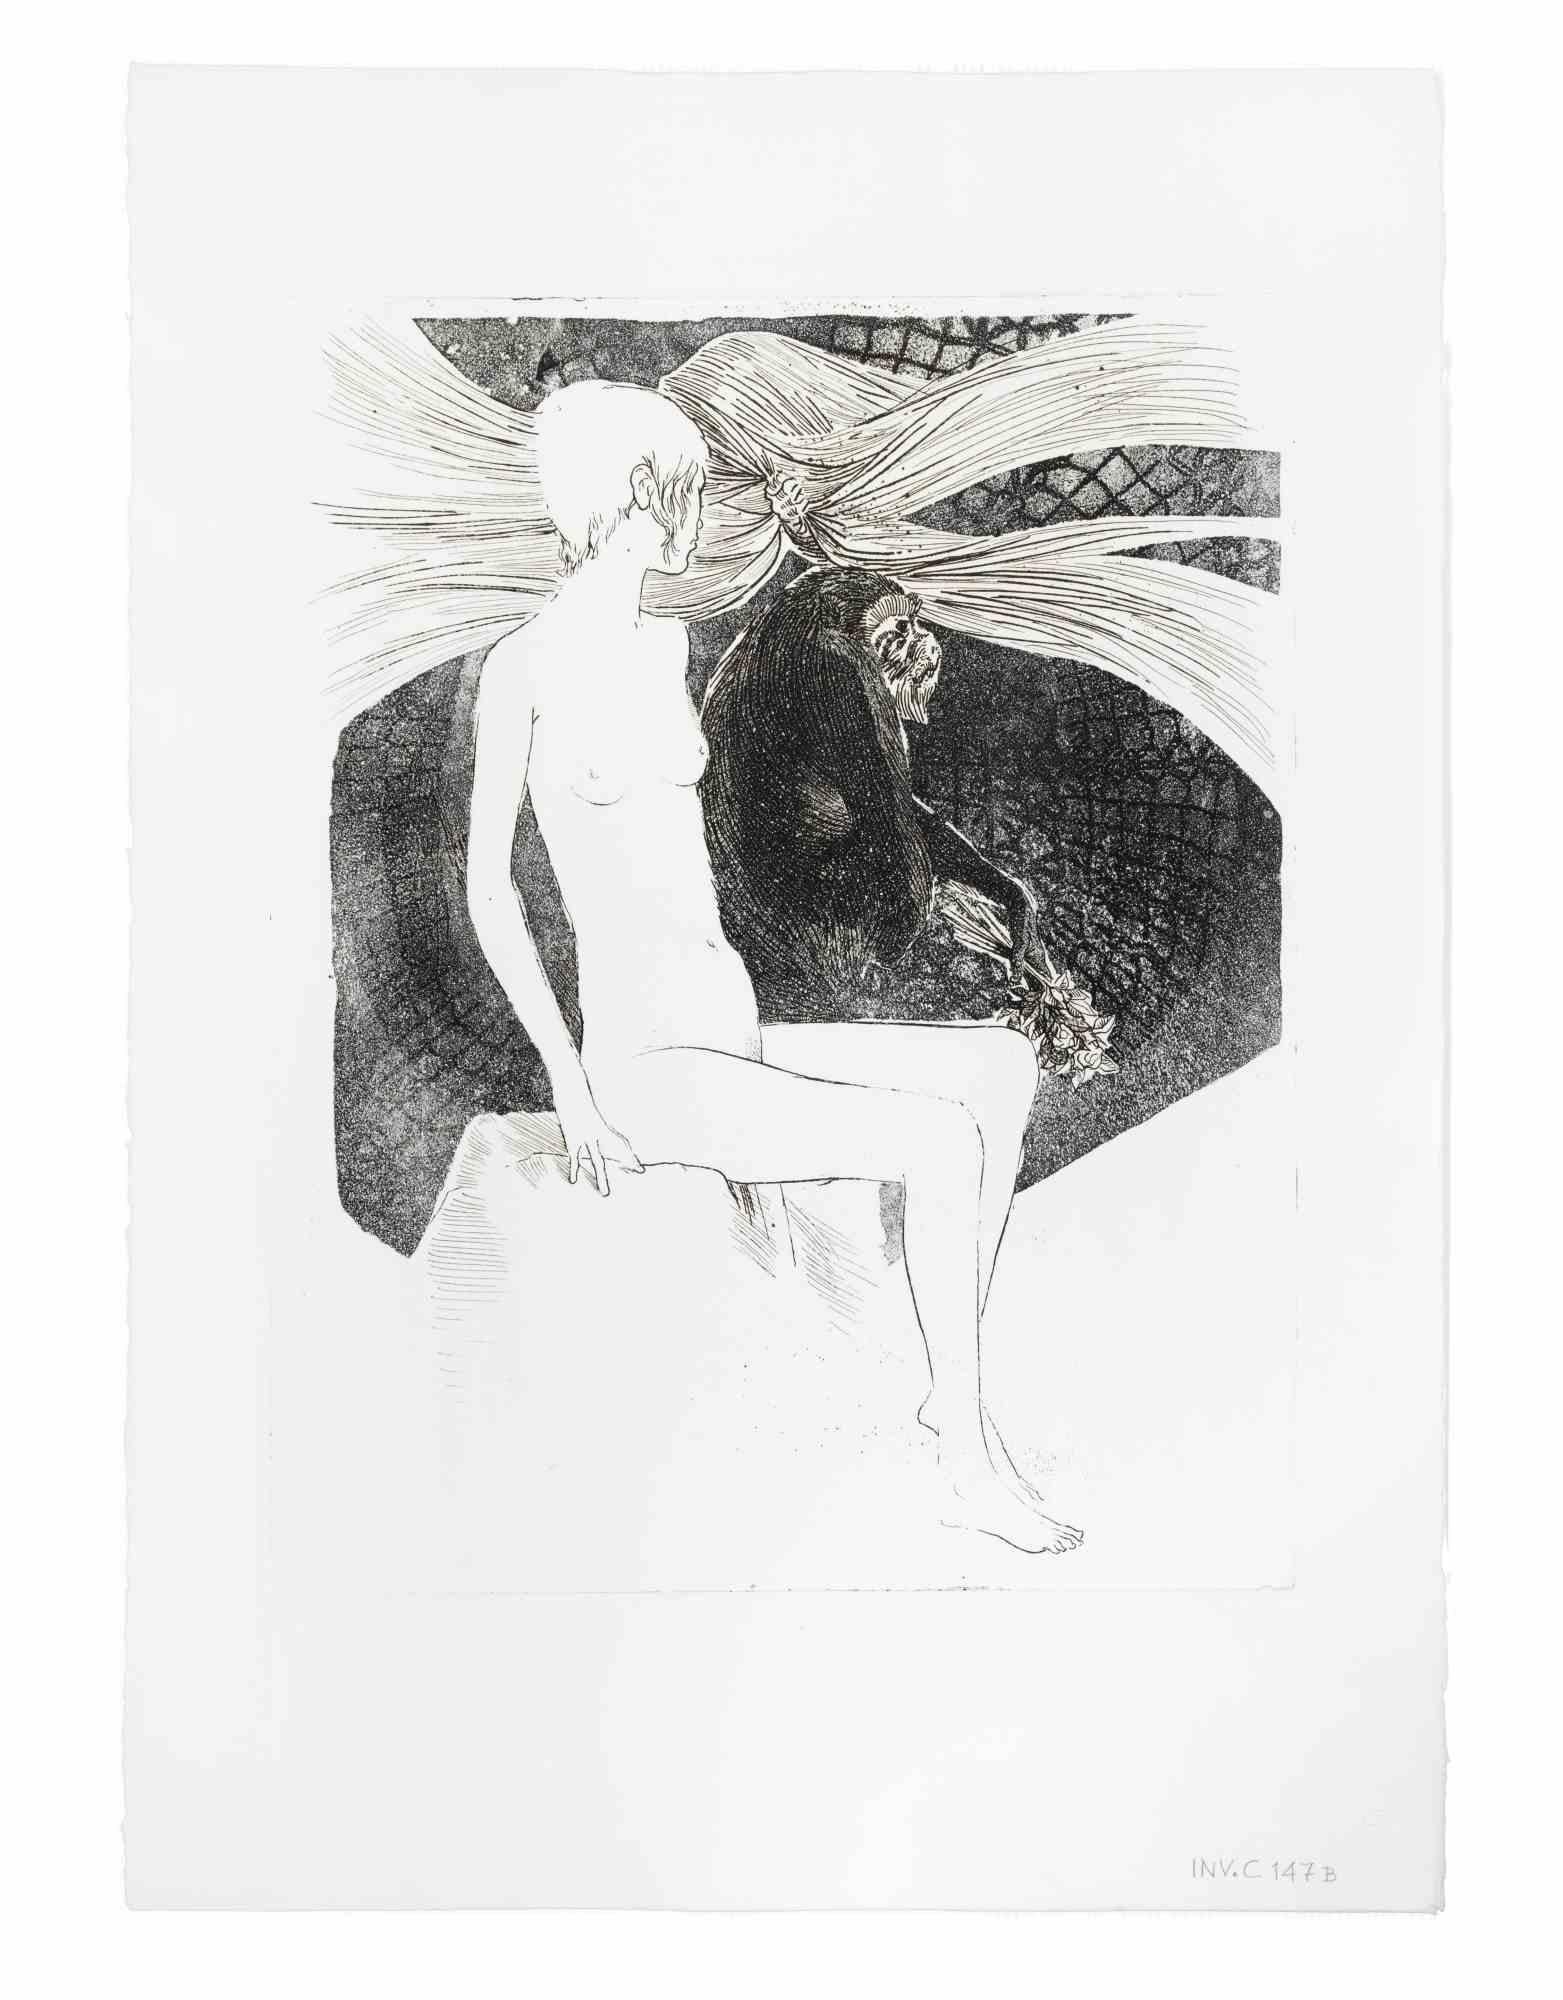 Sibilla Sibilla (Sibyl) is an artwork realized by the italian Contemporary artist  Leo Guida (1992 - 2017) in 1975s.

Black and white etching on paper.

Good condition

Leo Guida  (1992 - 2017). Sensitive to current issues, artistic movements and